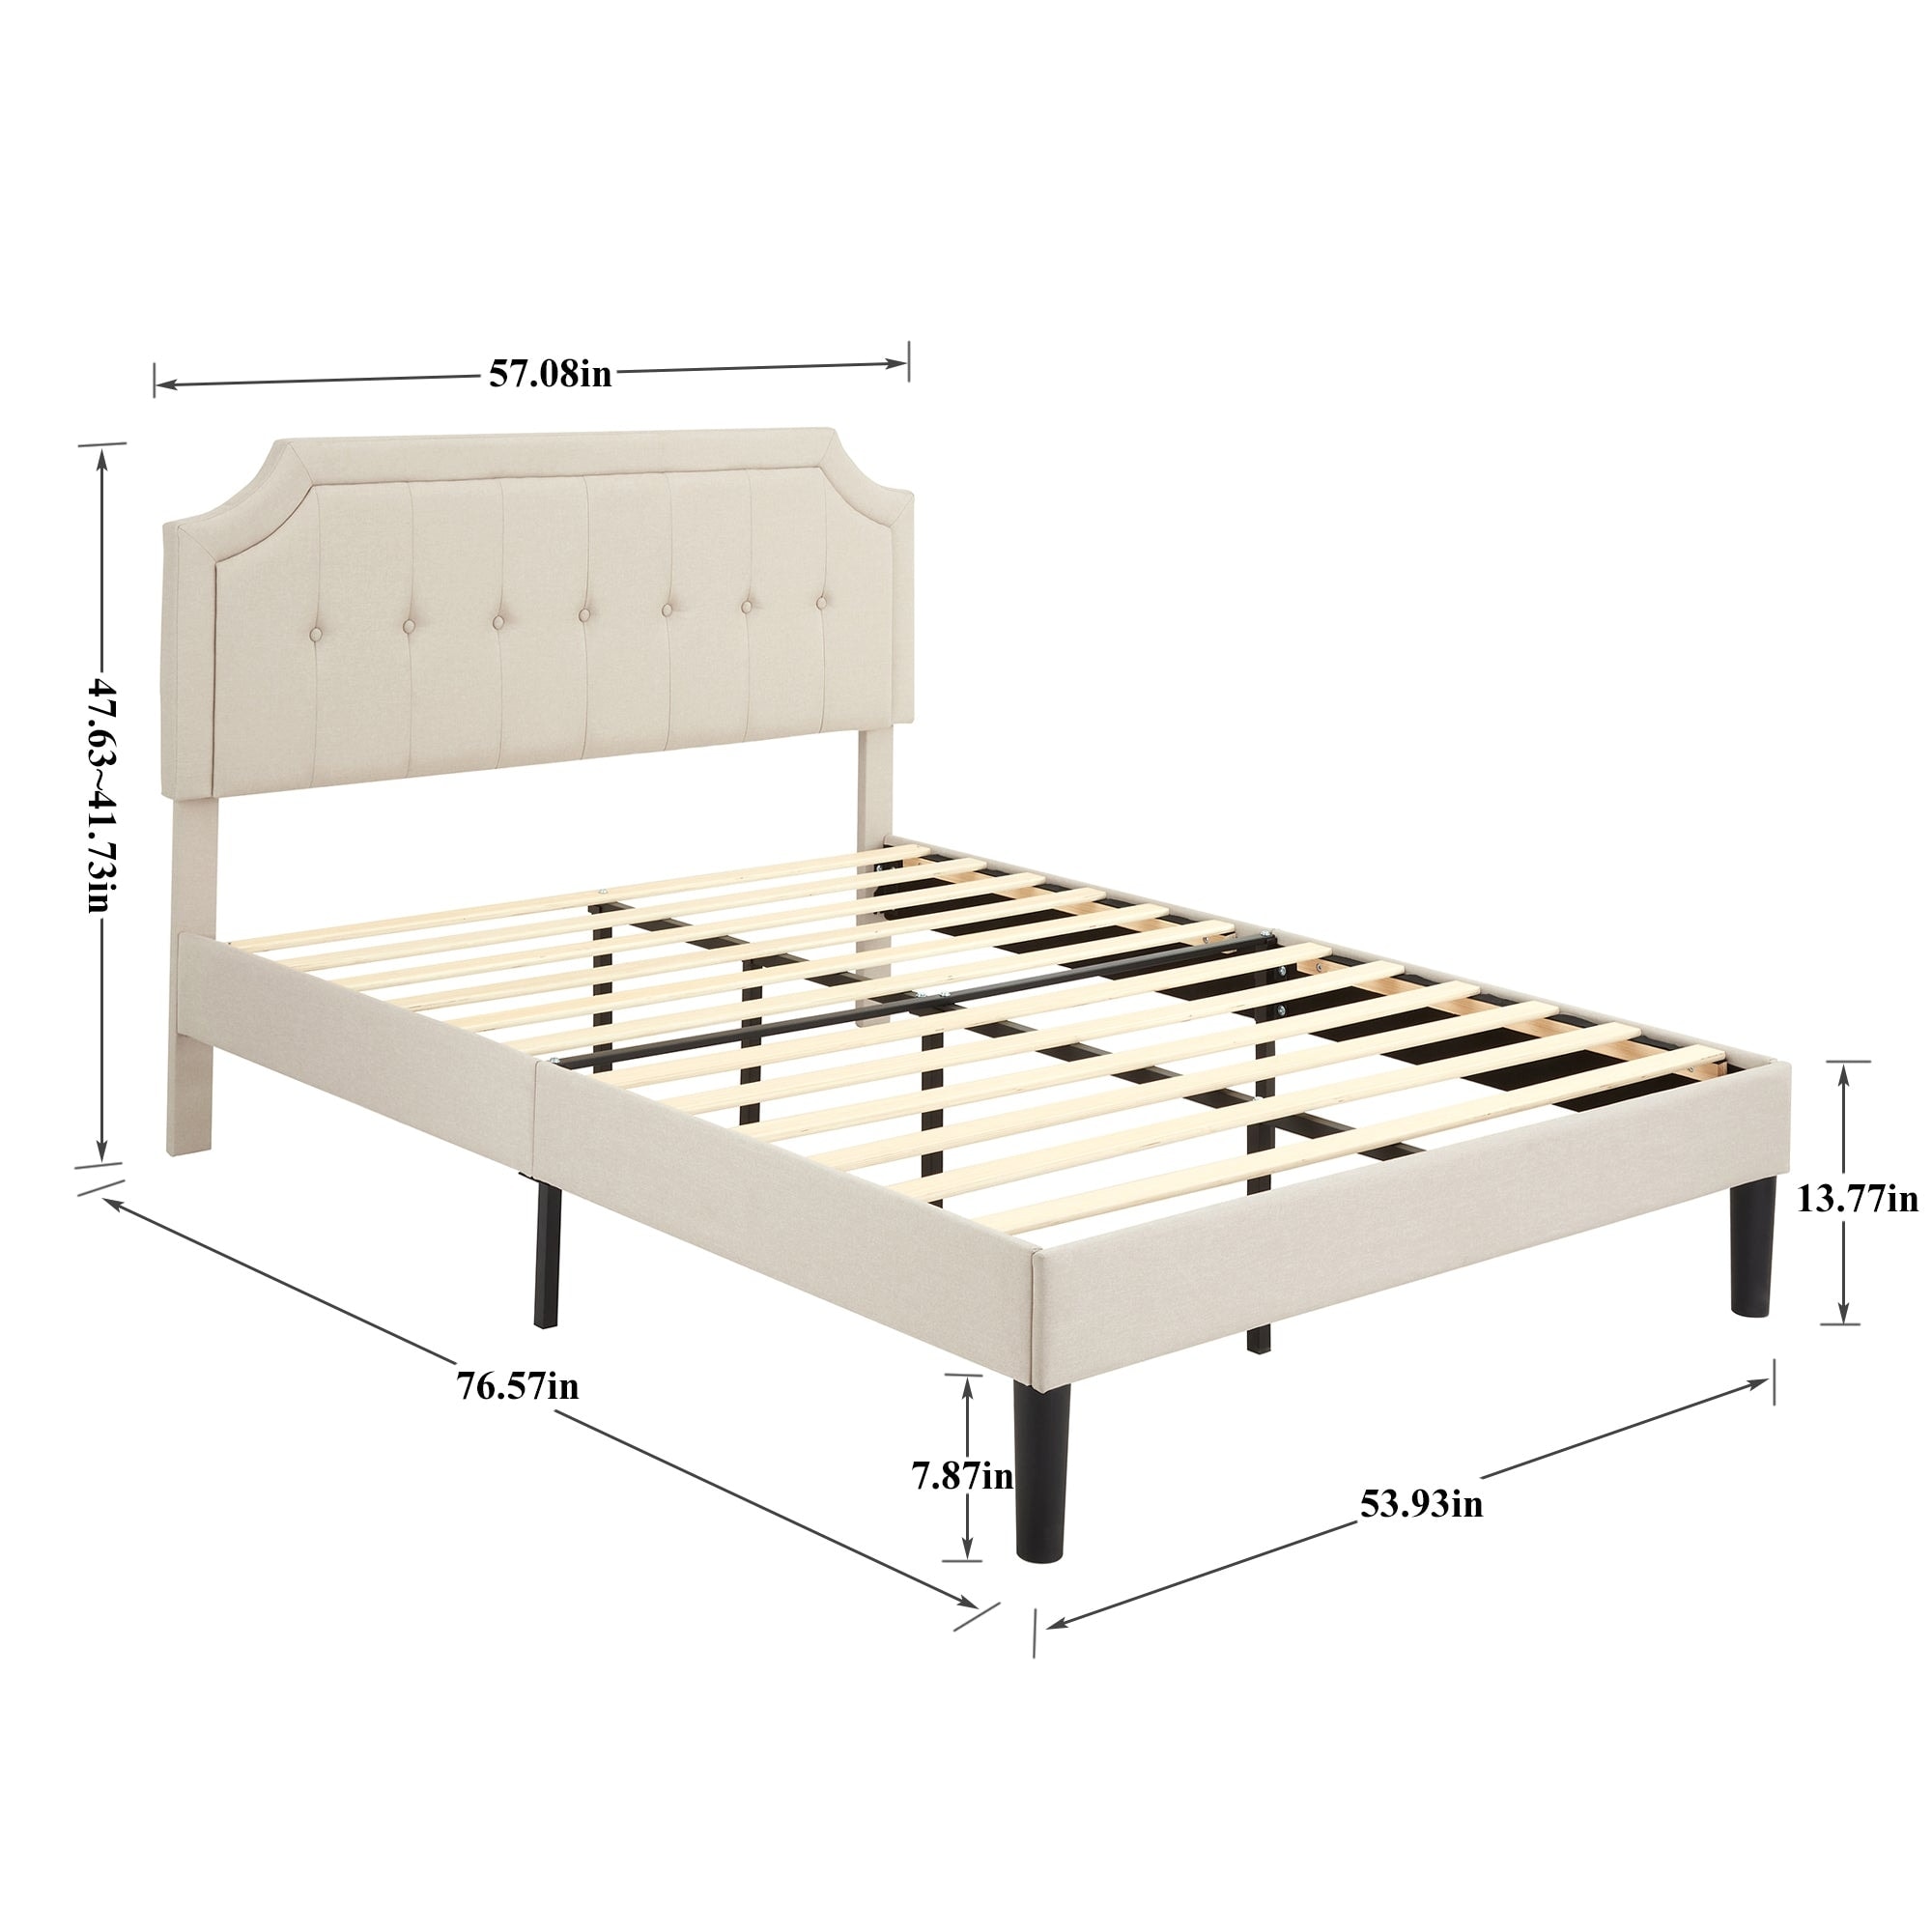 https://ak1.ostkcdn.com/images/products/is/images/direct/65f2097c596d8add438c065b52ff4acc92592a53/VECELO-Upholstered-Platform-Bed-with-Adjustable-Headboard%2CBeige%2C-Full-Queen-Size-Bed.jpg